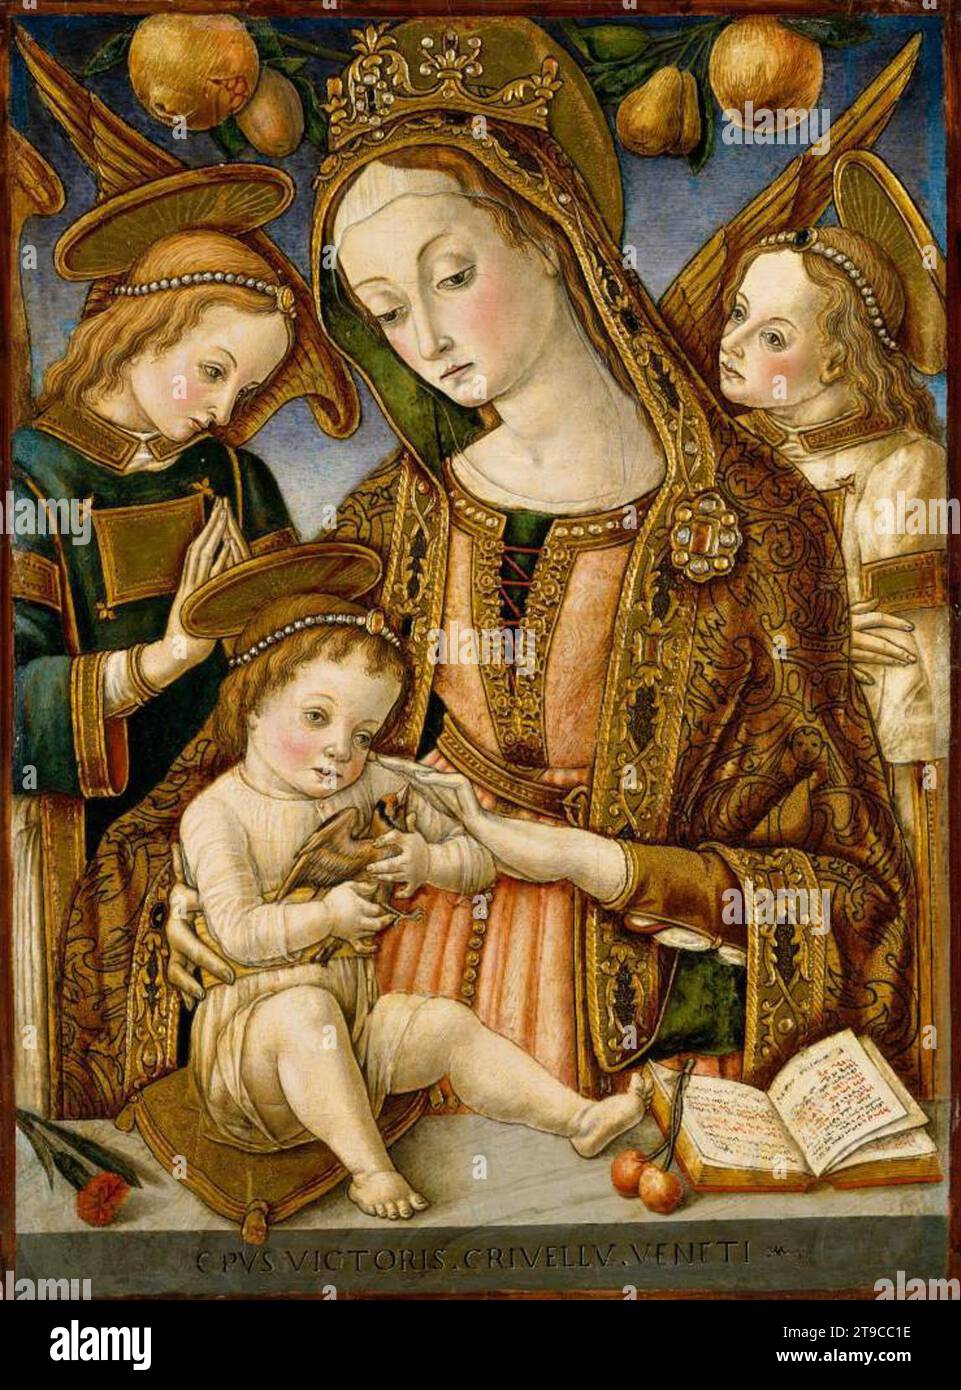 Madonna and Child with Two Angels 1481-82 by Vittore Crivelli Stock Photo